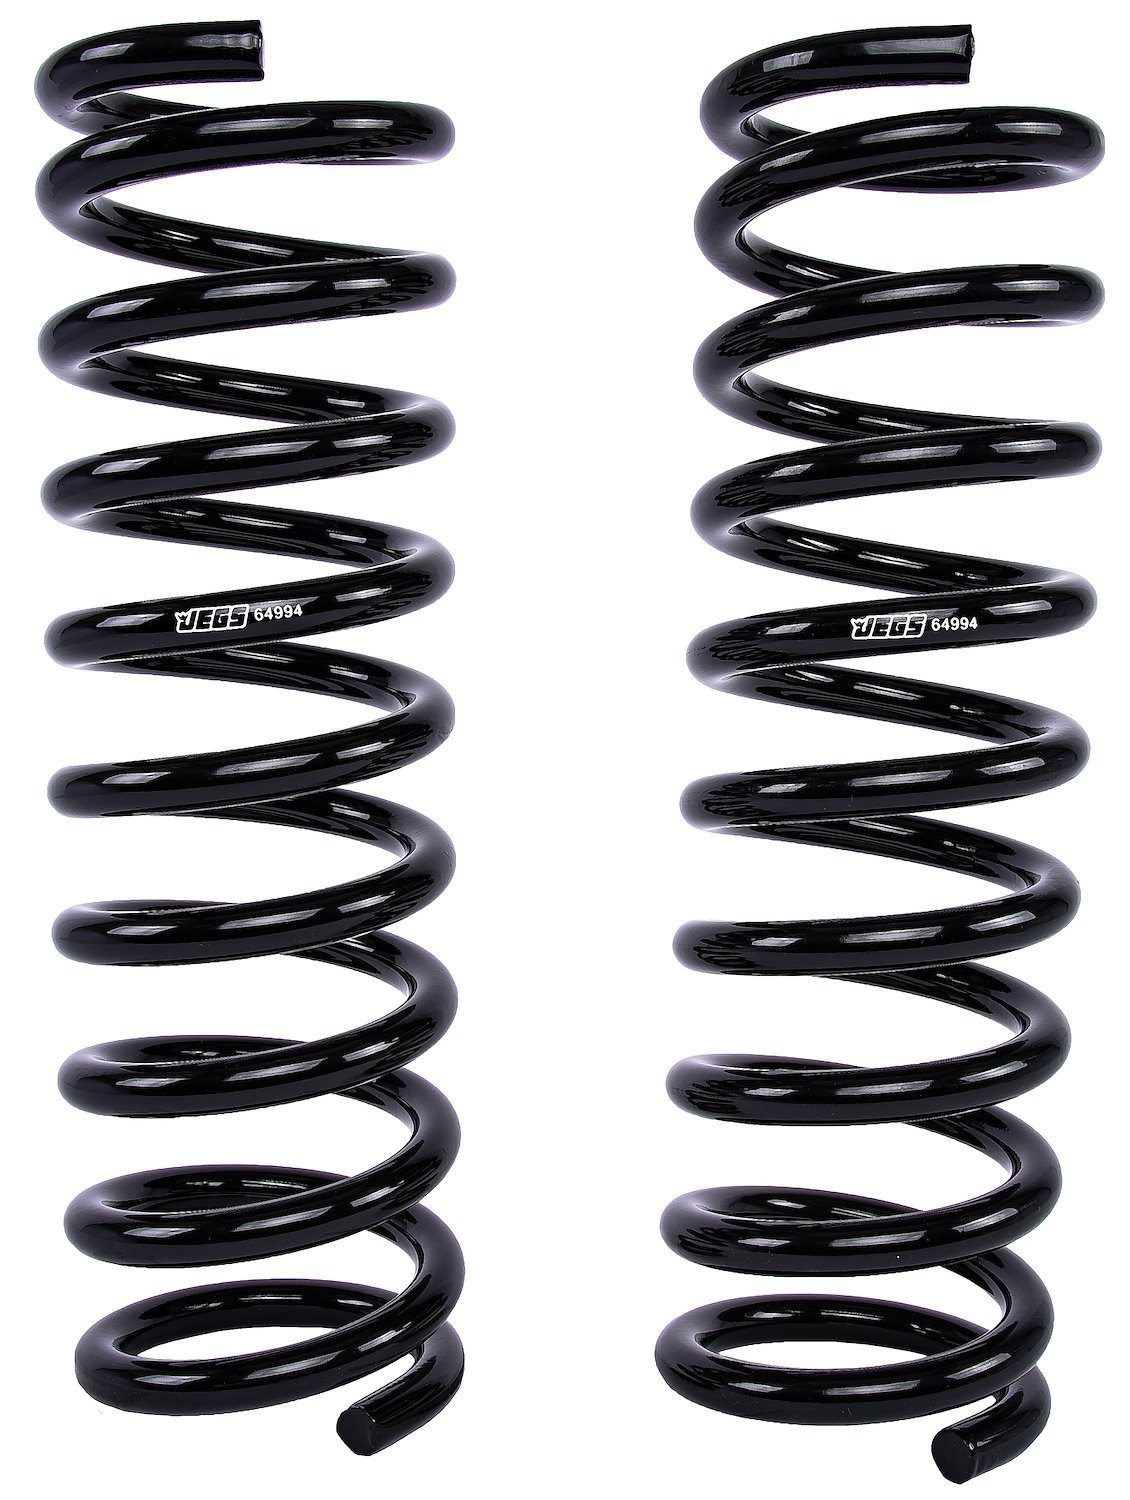 Replacement Front Coil Springs Fits Select 1955-1972 GM Models [16.440 in. Length, 328 lb./in., Black Powder-Coated Finish]